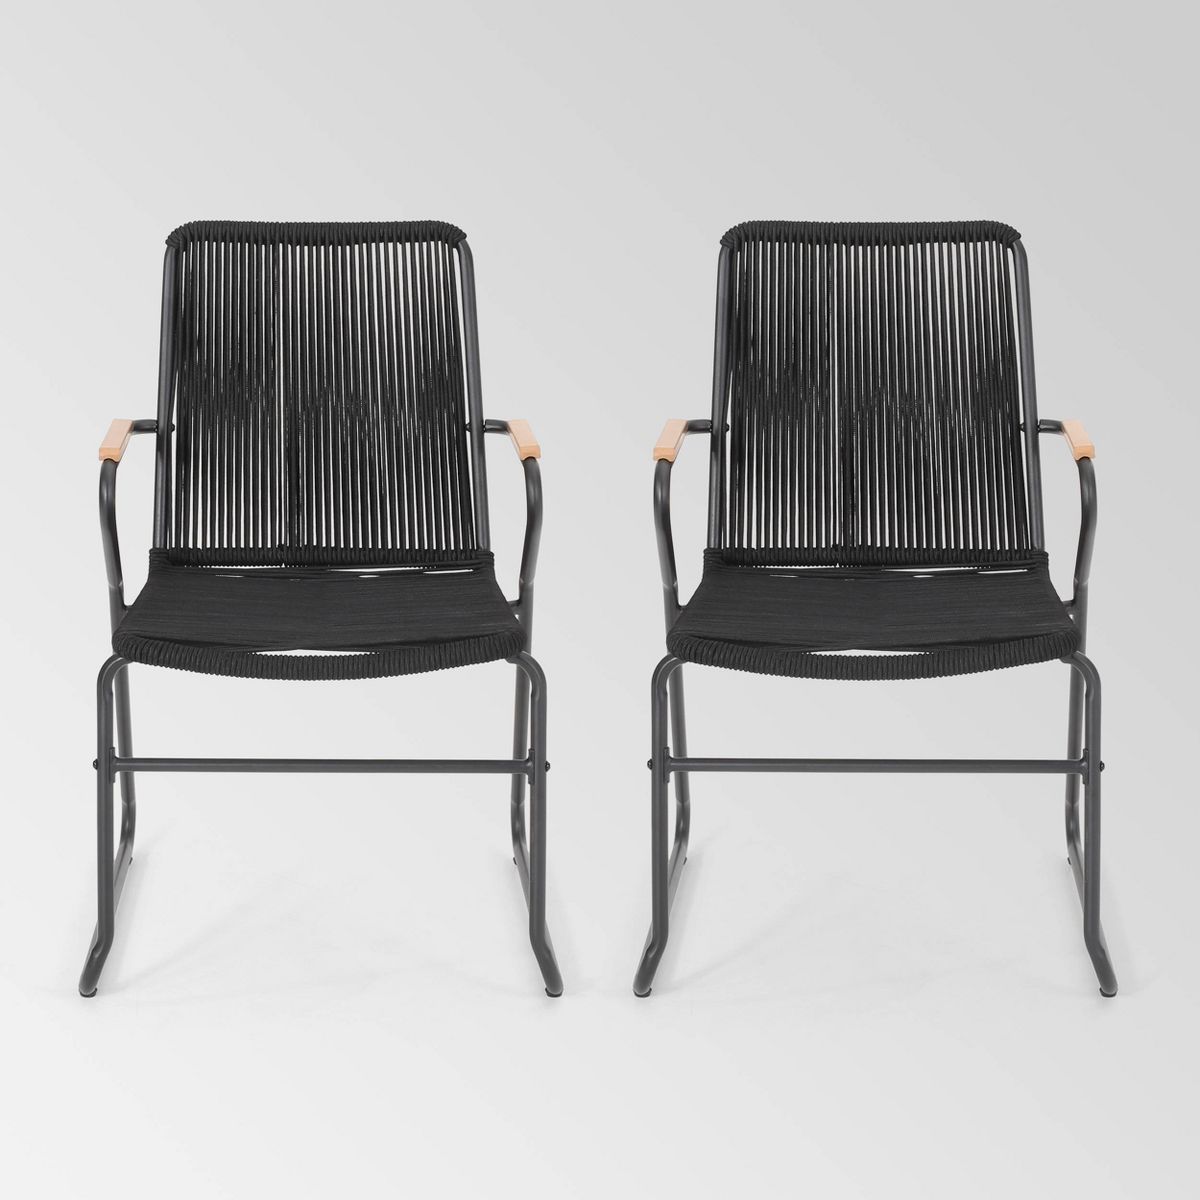 Moonstone Set of 2 Rope Weave Modern Club Chairs - Black - Christopher Knight Home | Target